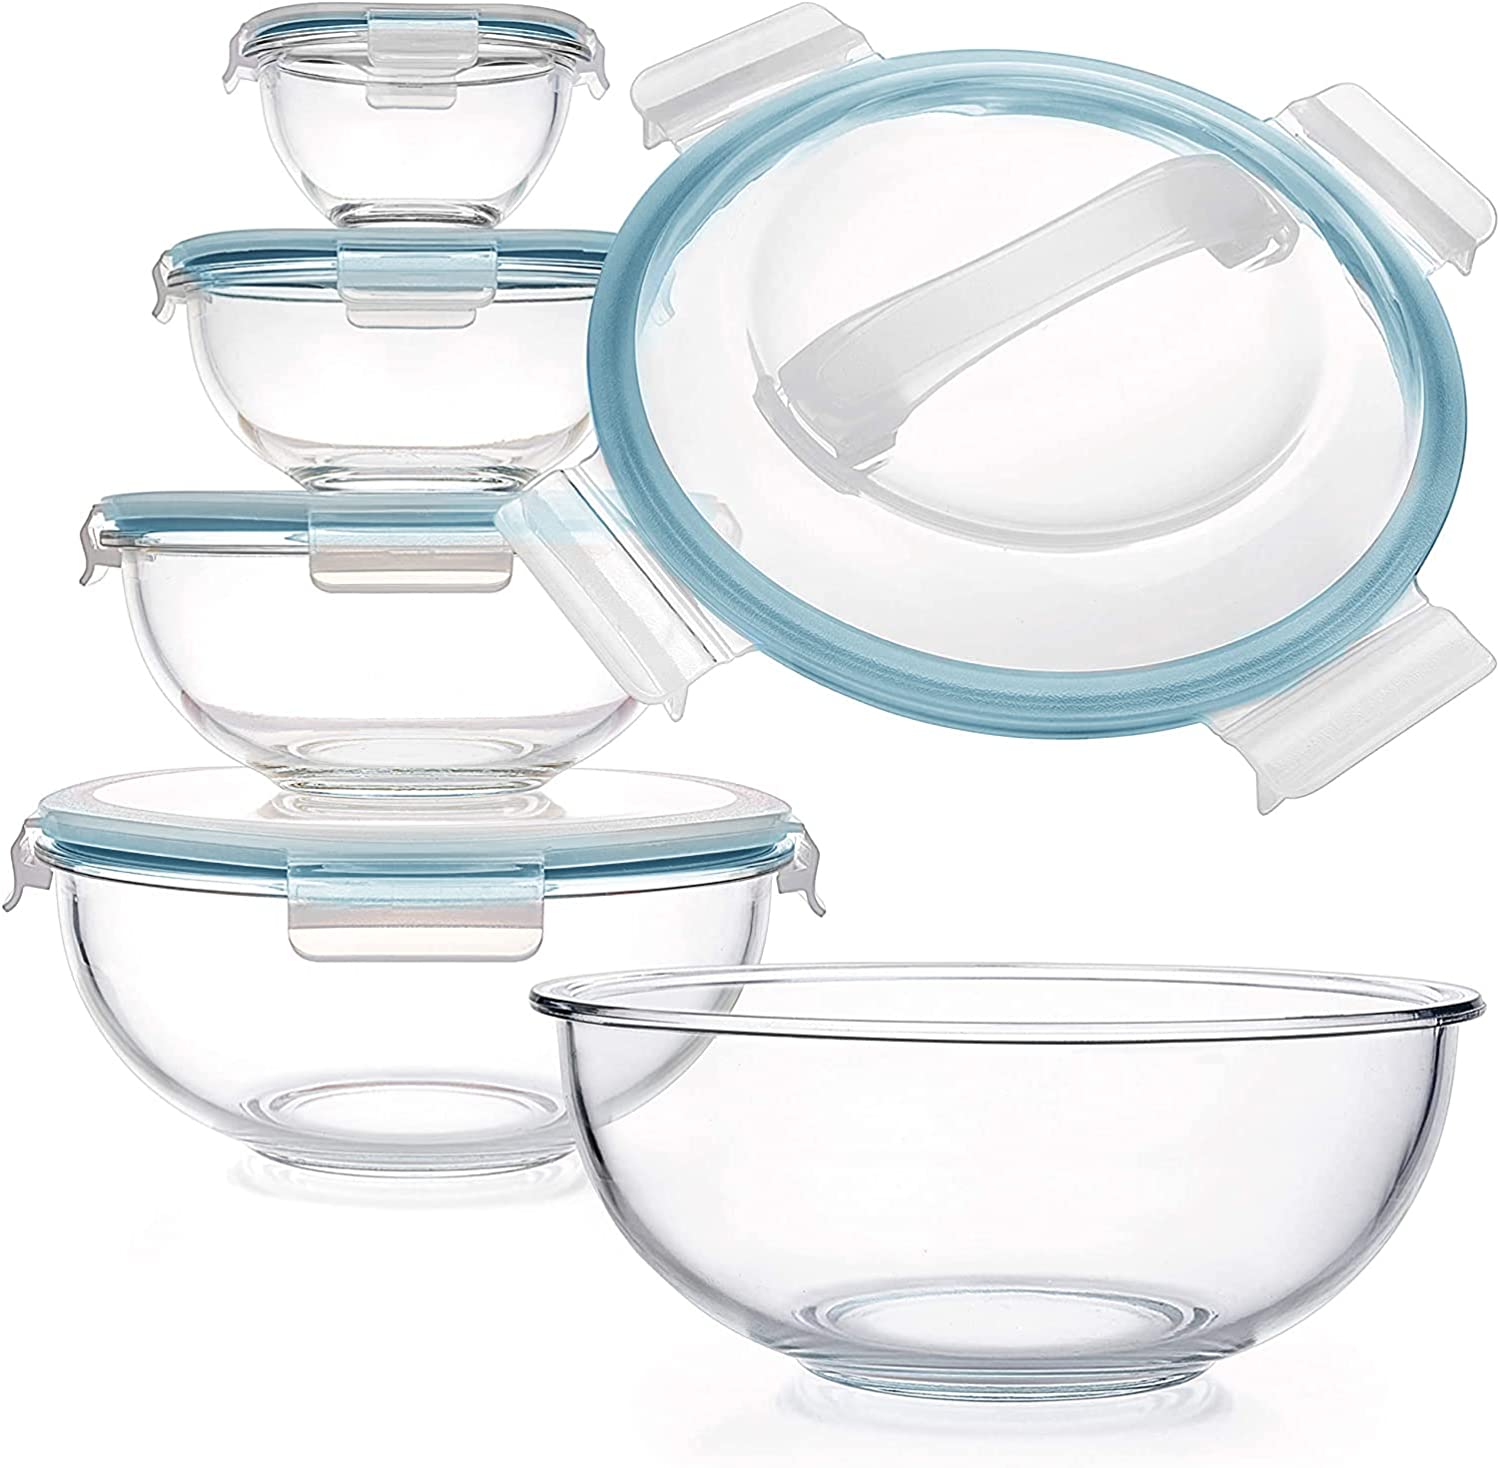 Superior Glass Mixing Bowls with Lids - 8 Piece Mixing Bowl Set